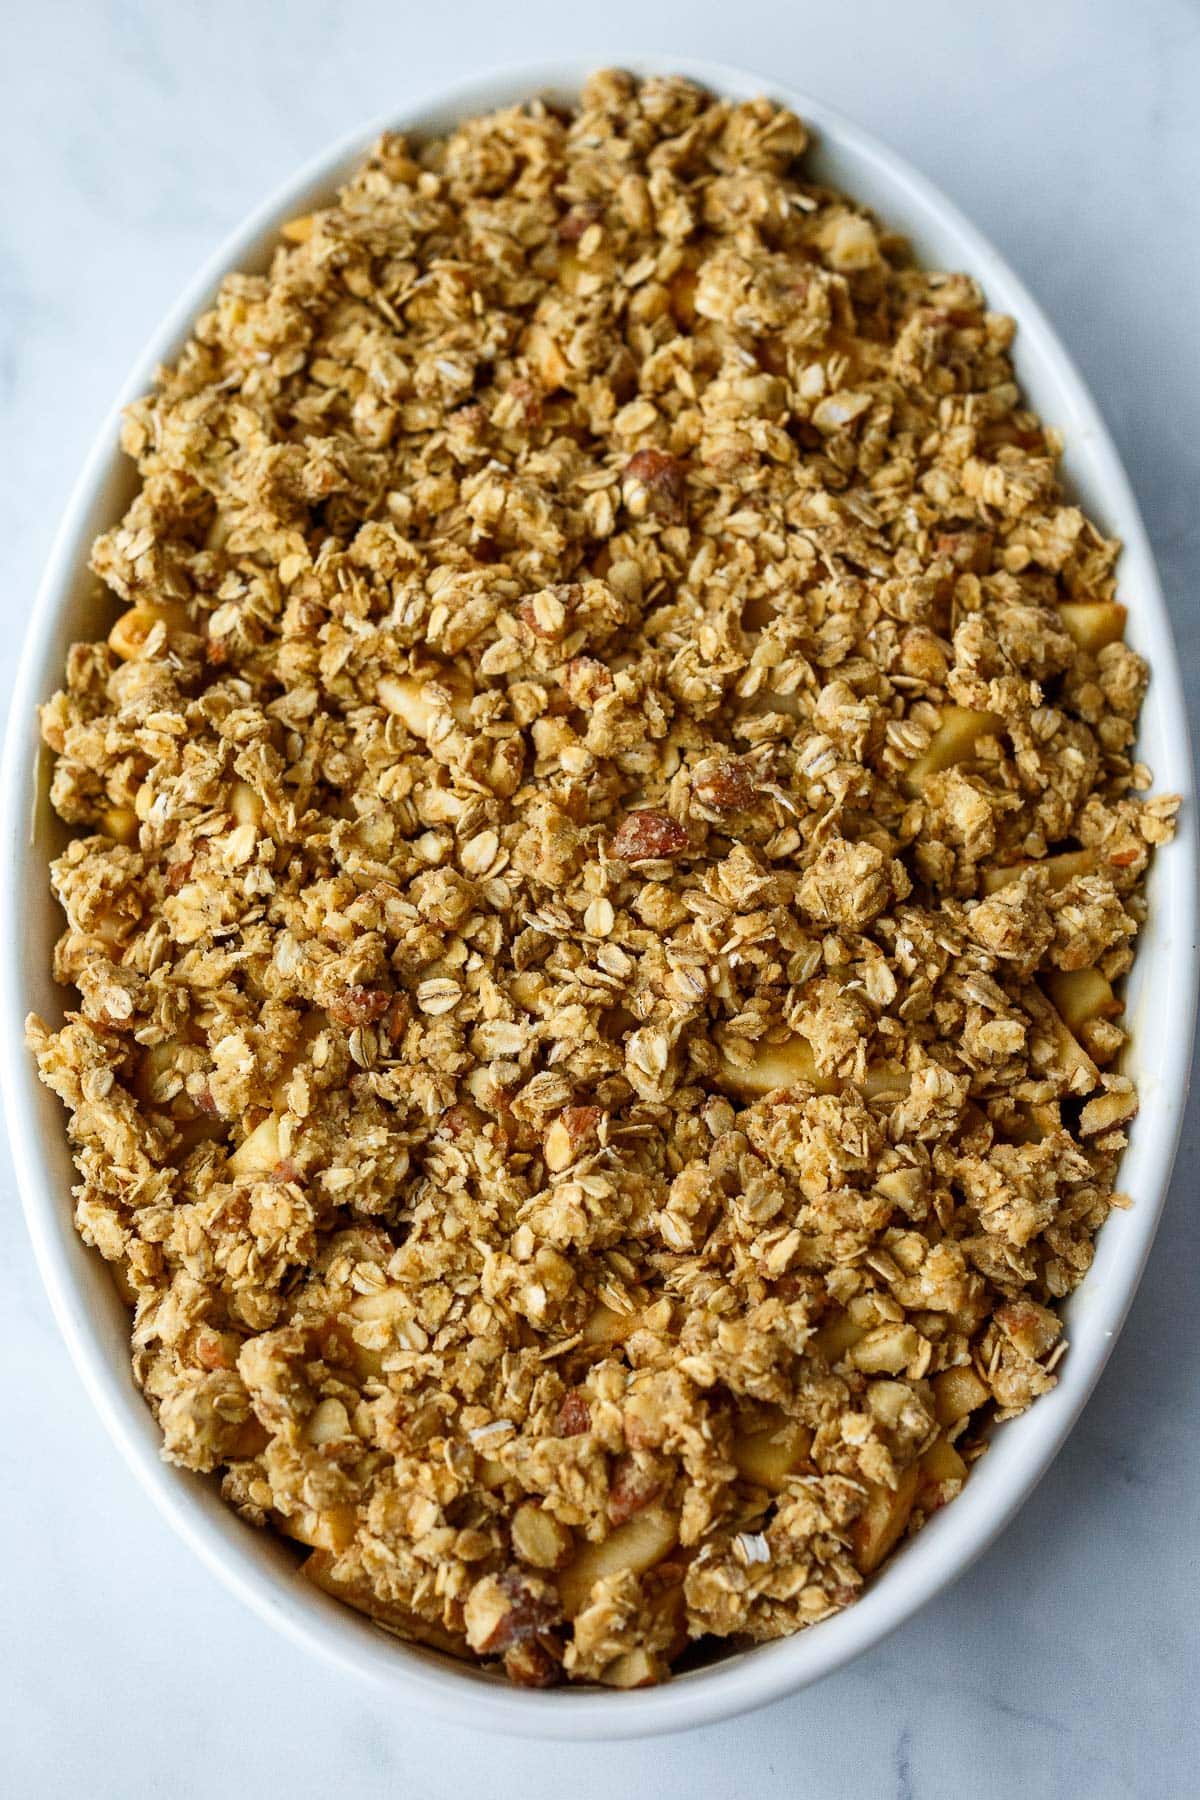 oat crumble topping in casserole dish for baked apple crisp recipe